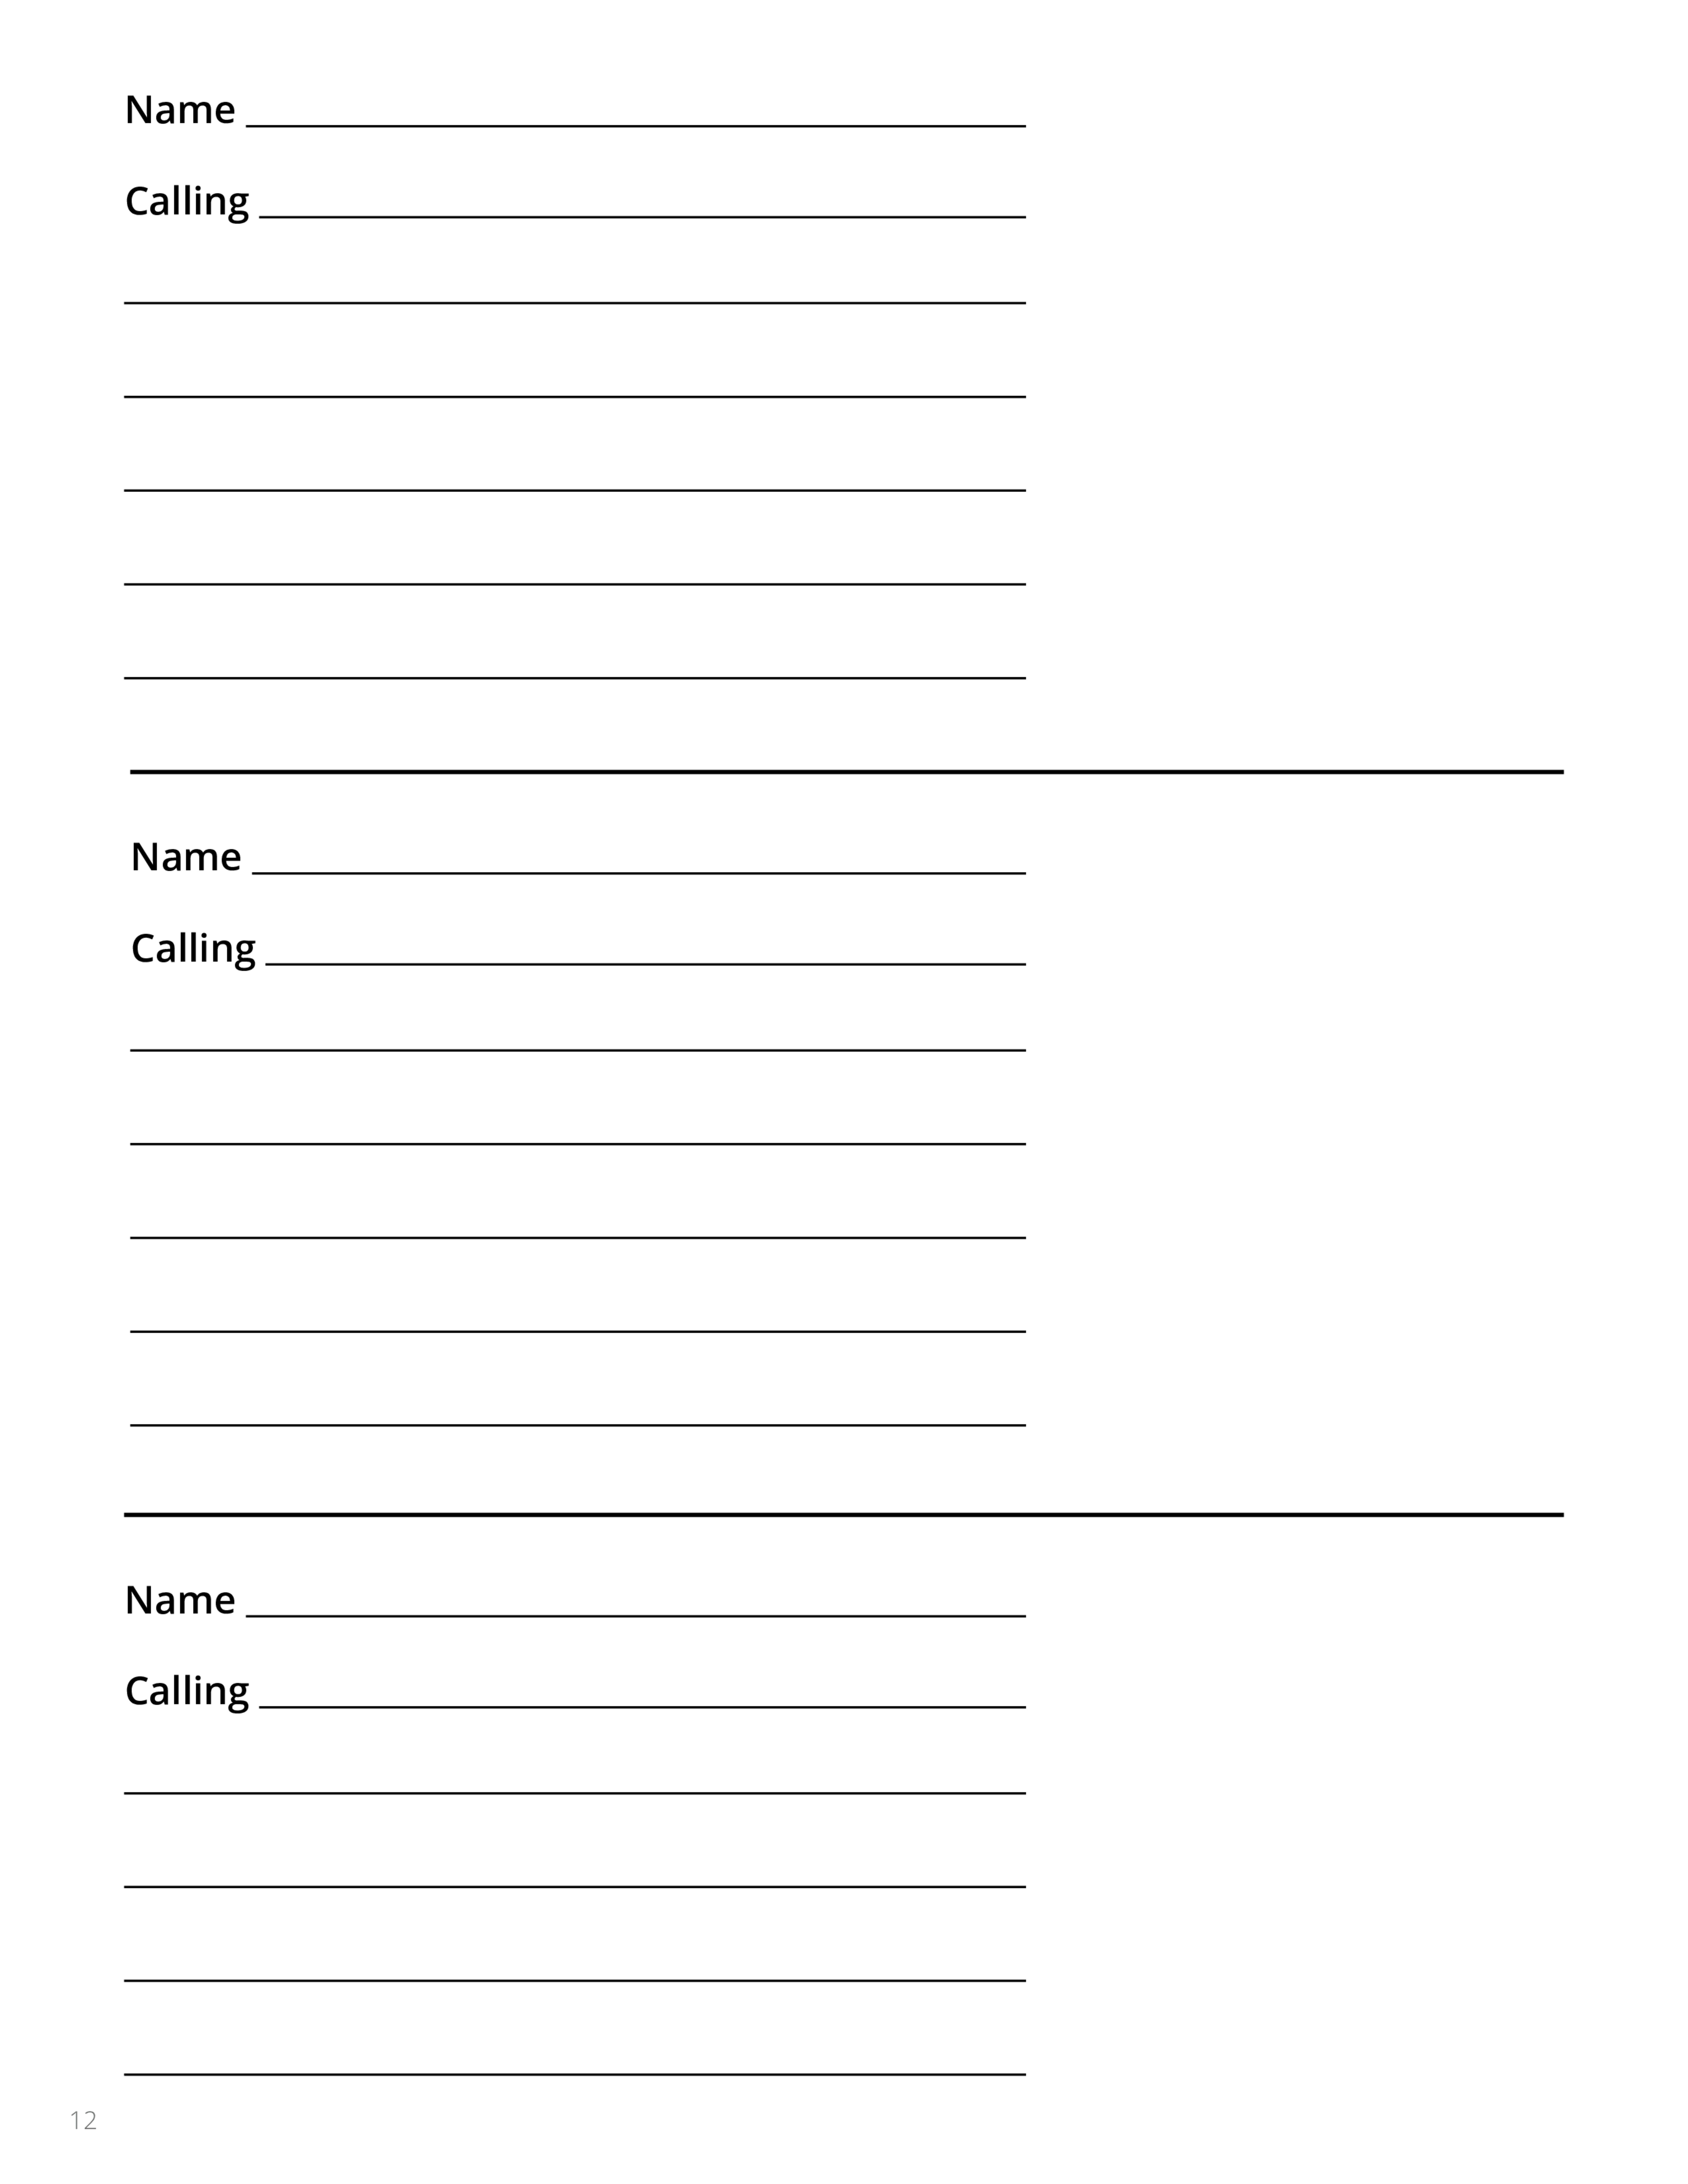 An activity page to encourage children to listen and write down thoughts or draw a picture of what other speakers say.